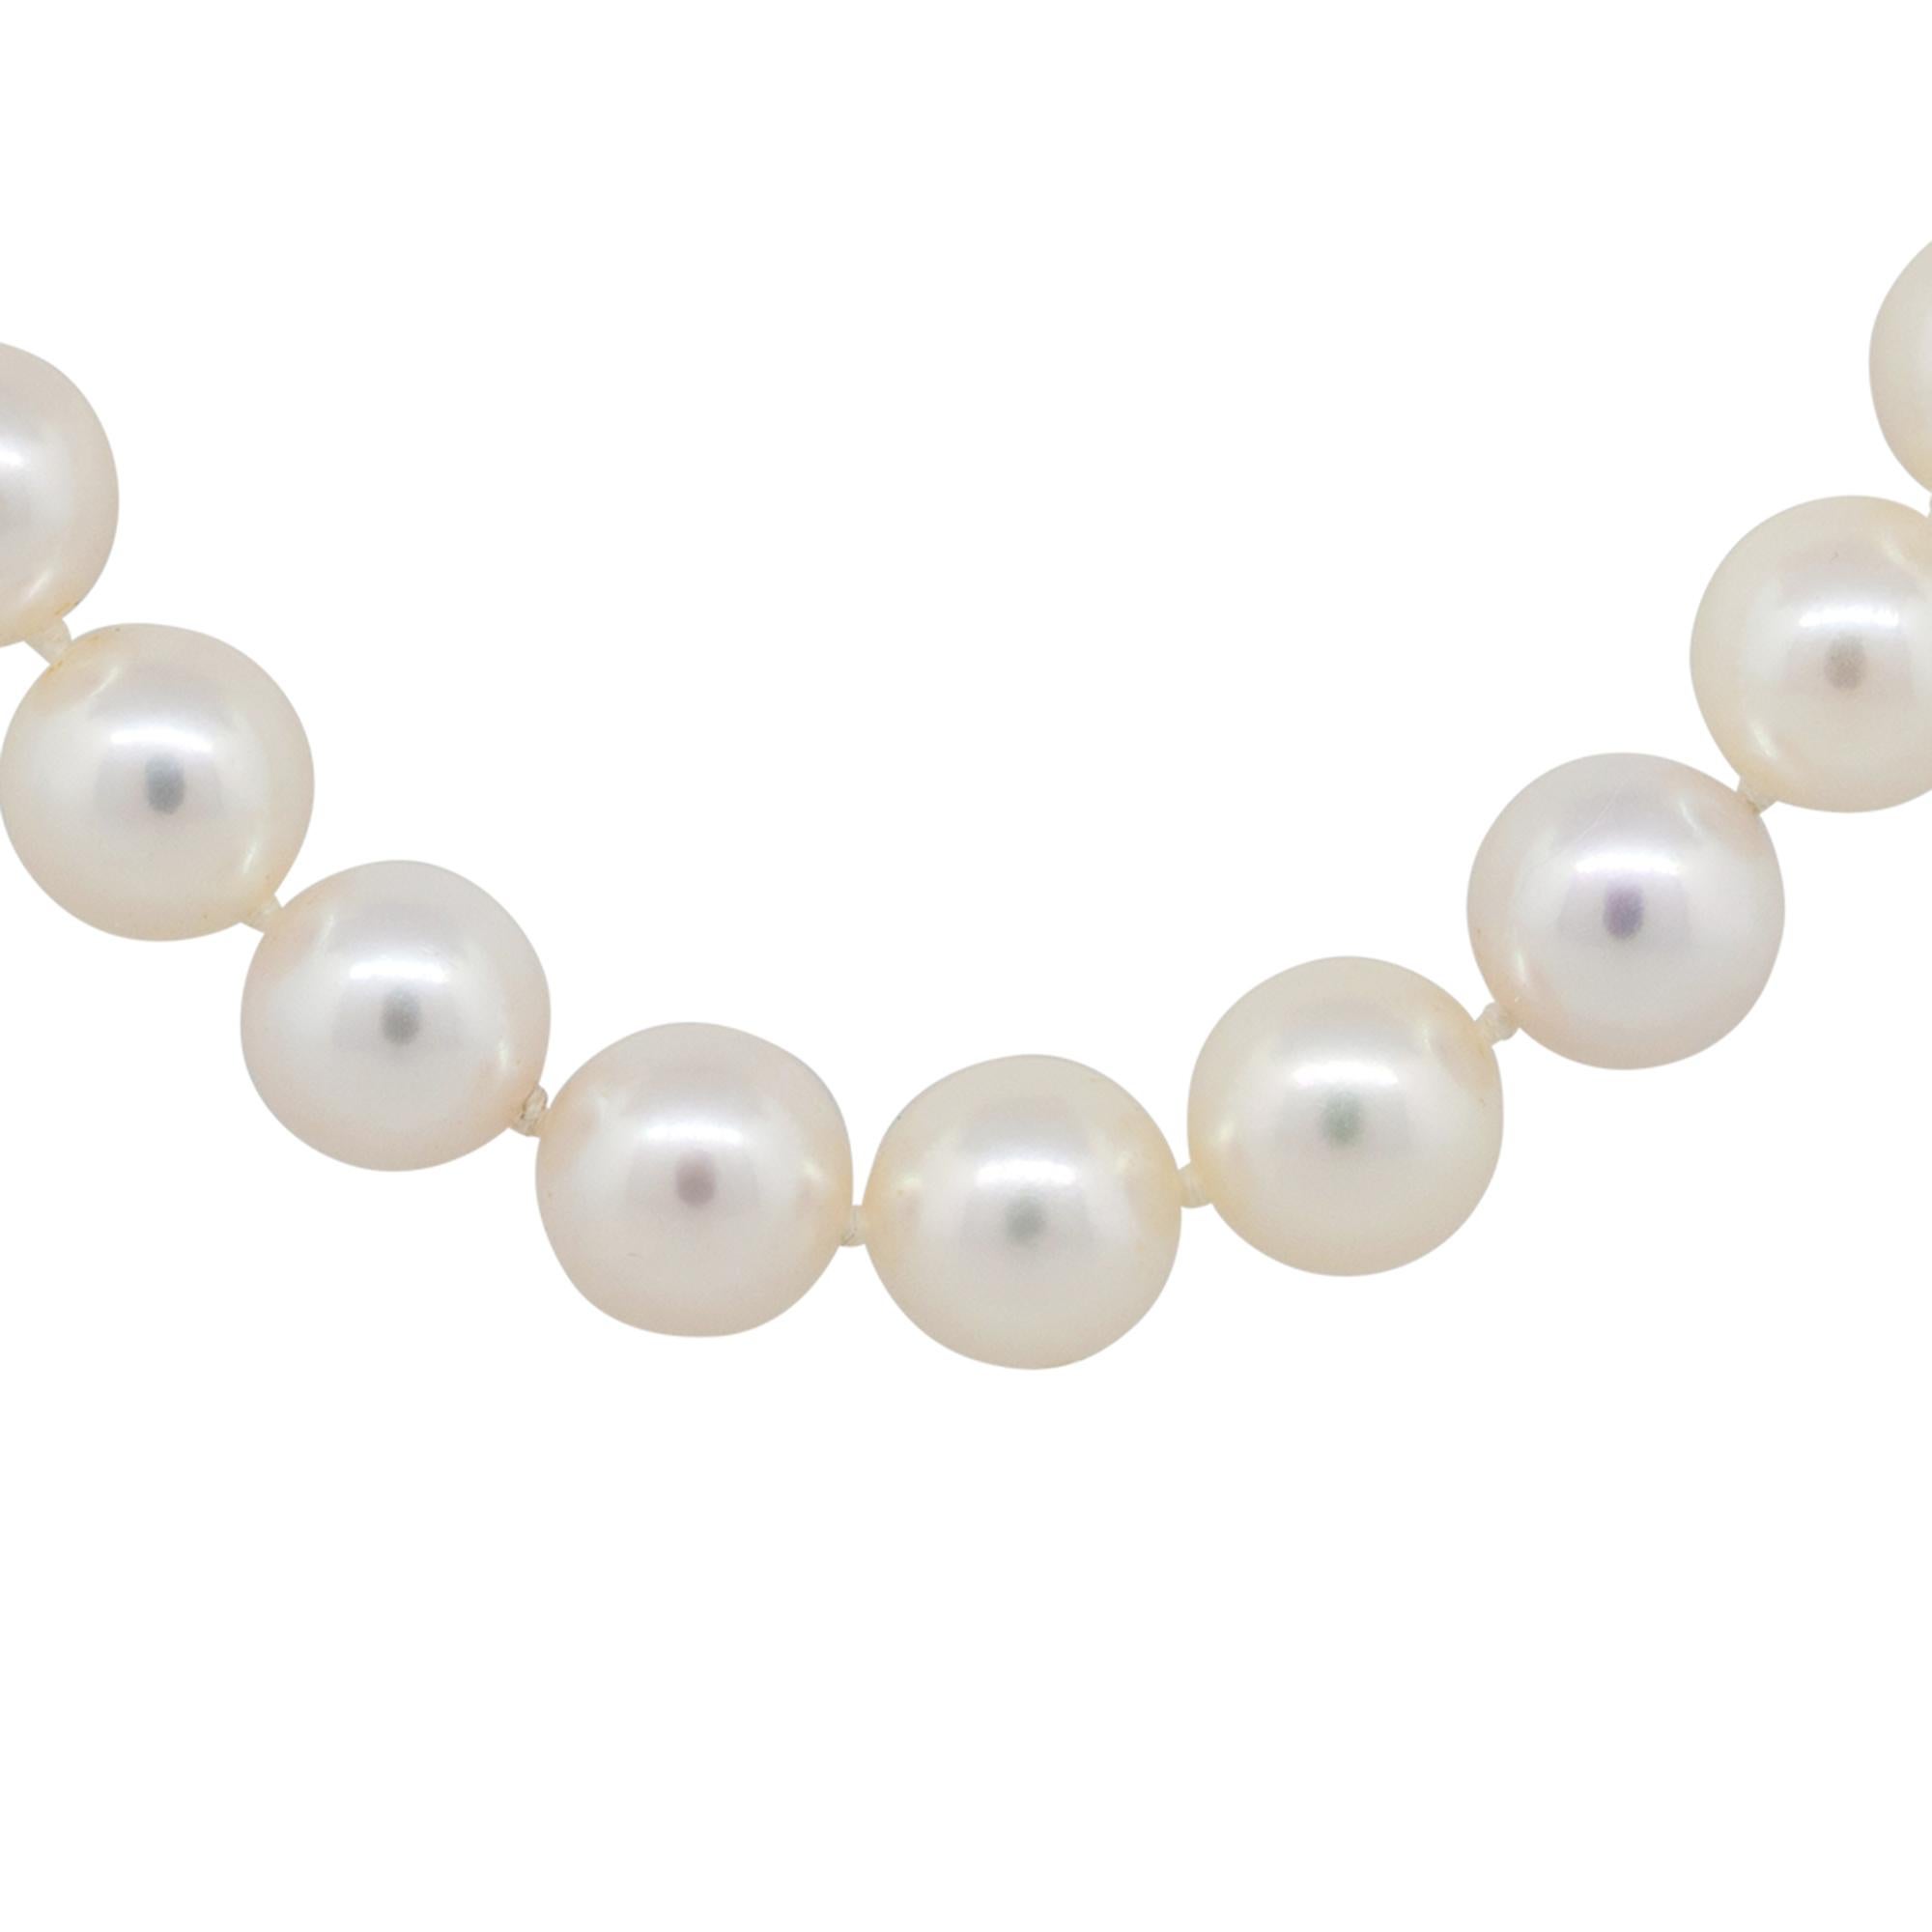 Material: 18k Yellow Gold
Pearl Details: Approx. 7mm Pearls
Necklace Length: 16